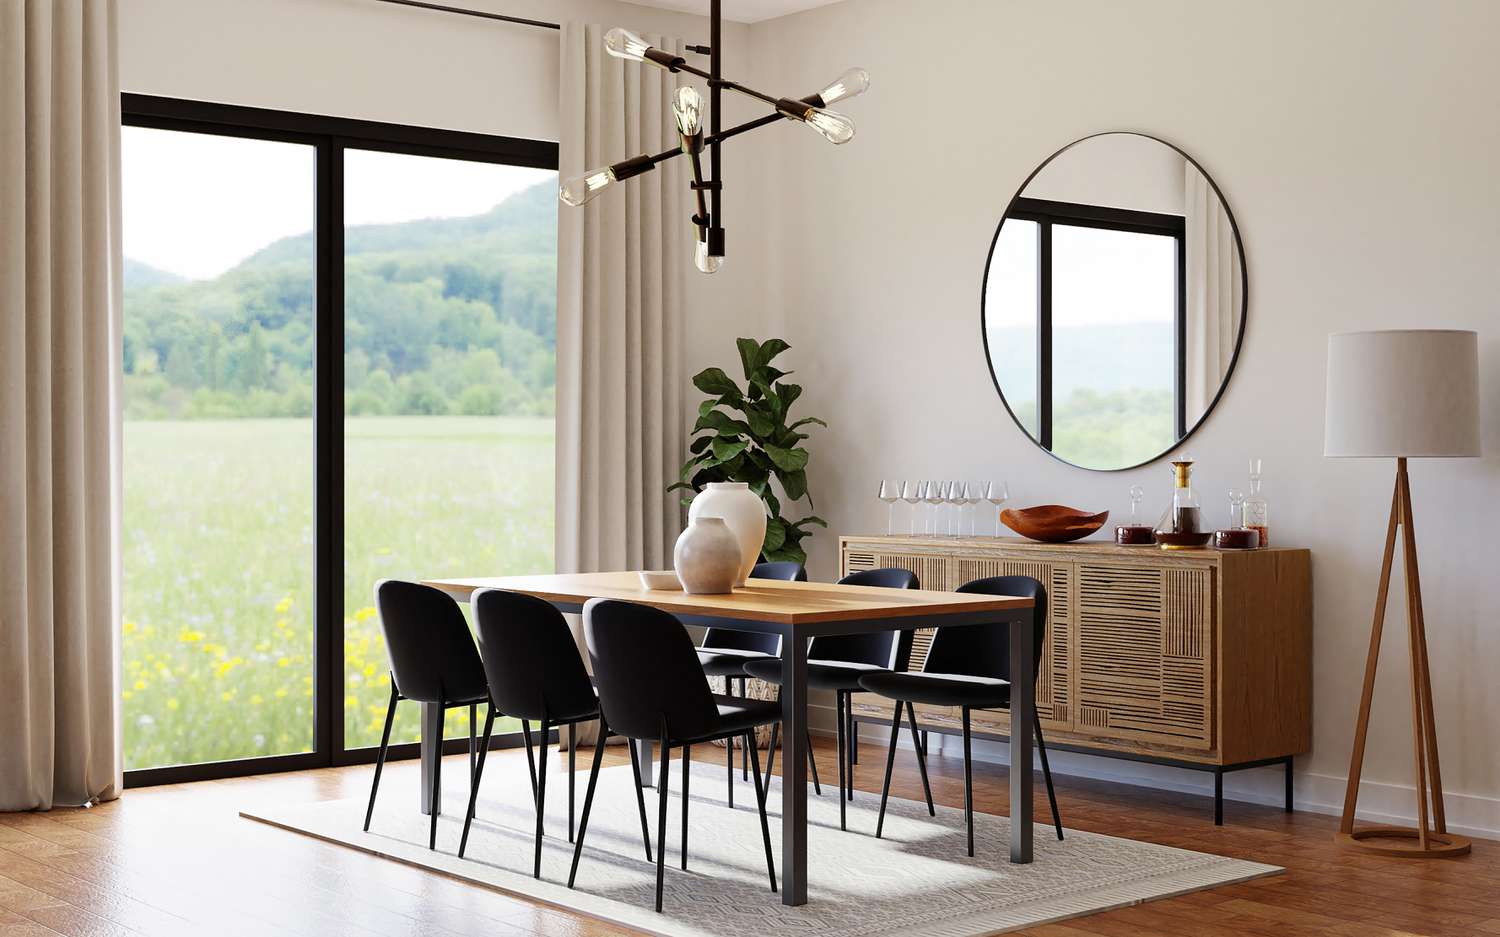 20 Scandinavian Dining Rooms Ideas that will Awe Your Guests